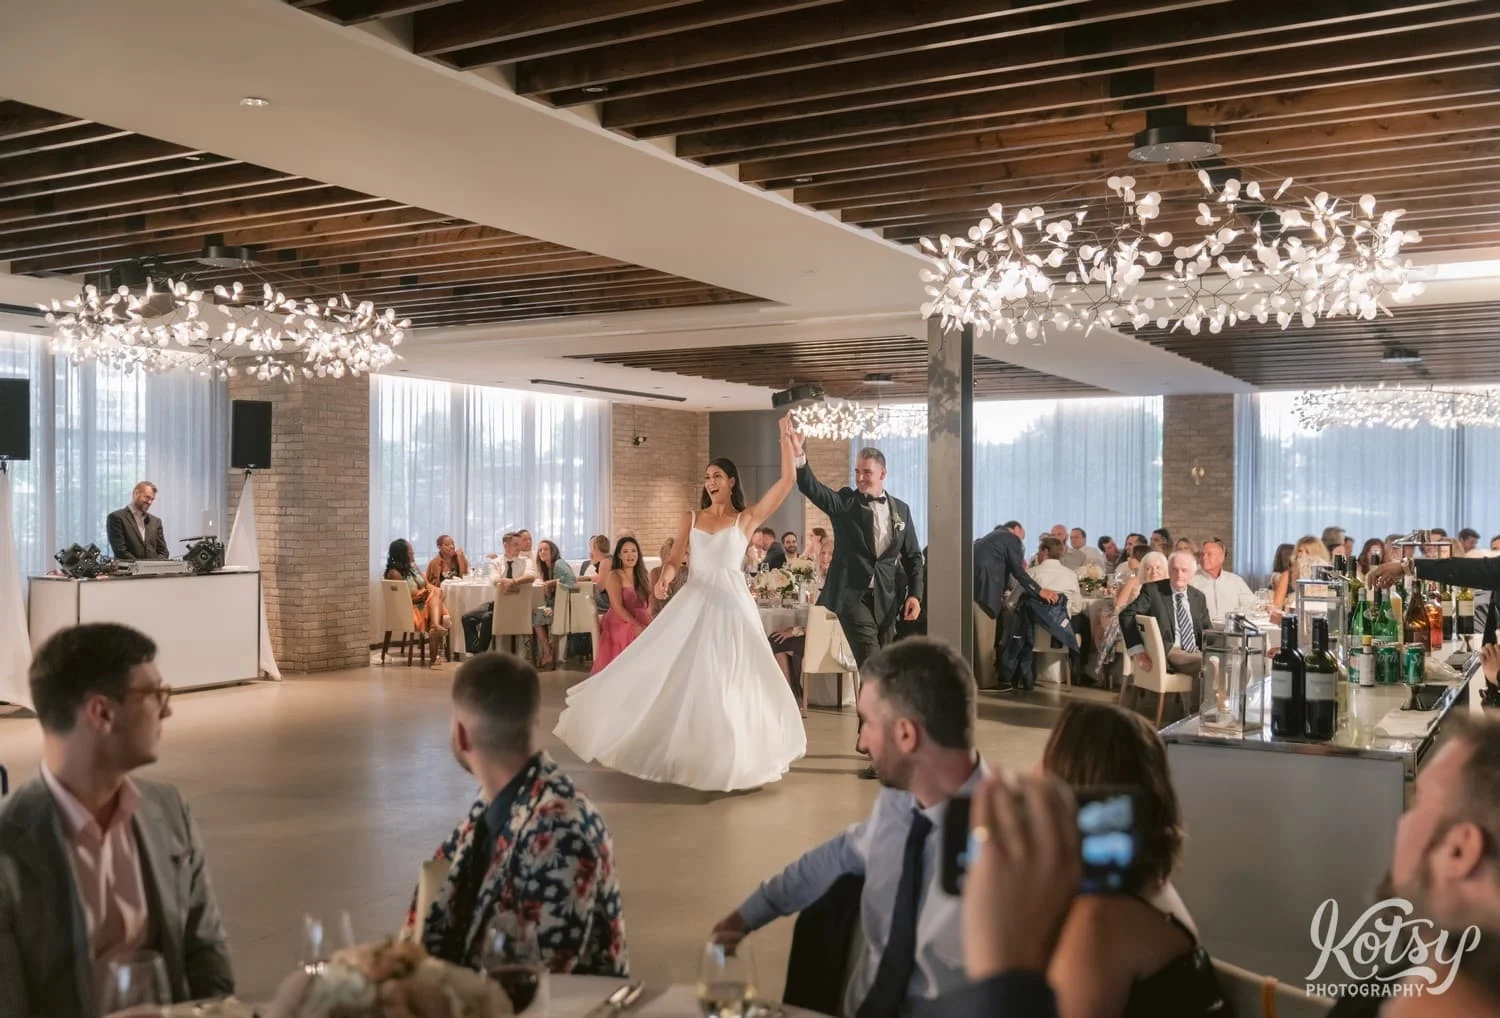 A bride and groom raise their hands in front of all their guests during their Village Loft wedding reception in Toronto, Canada